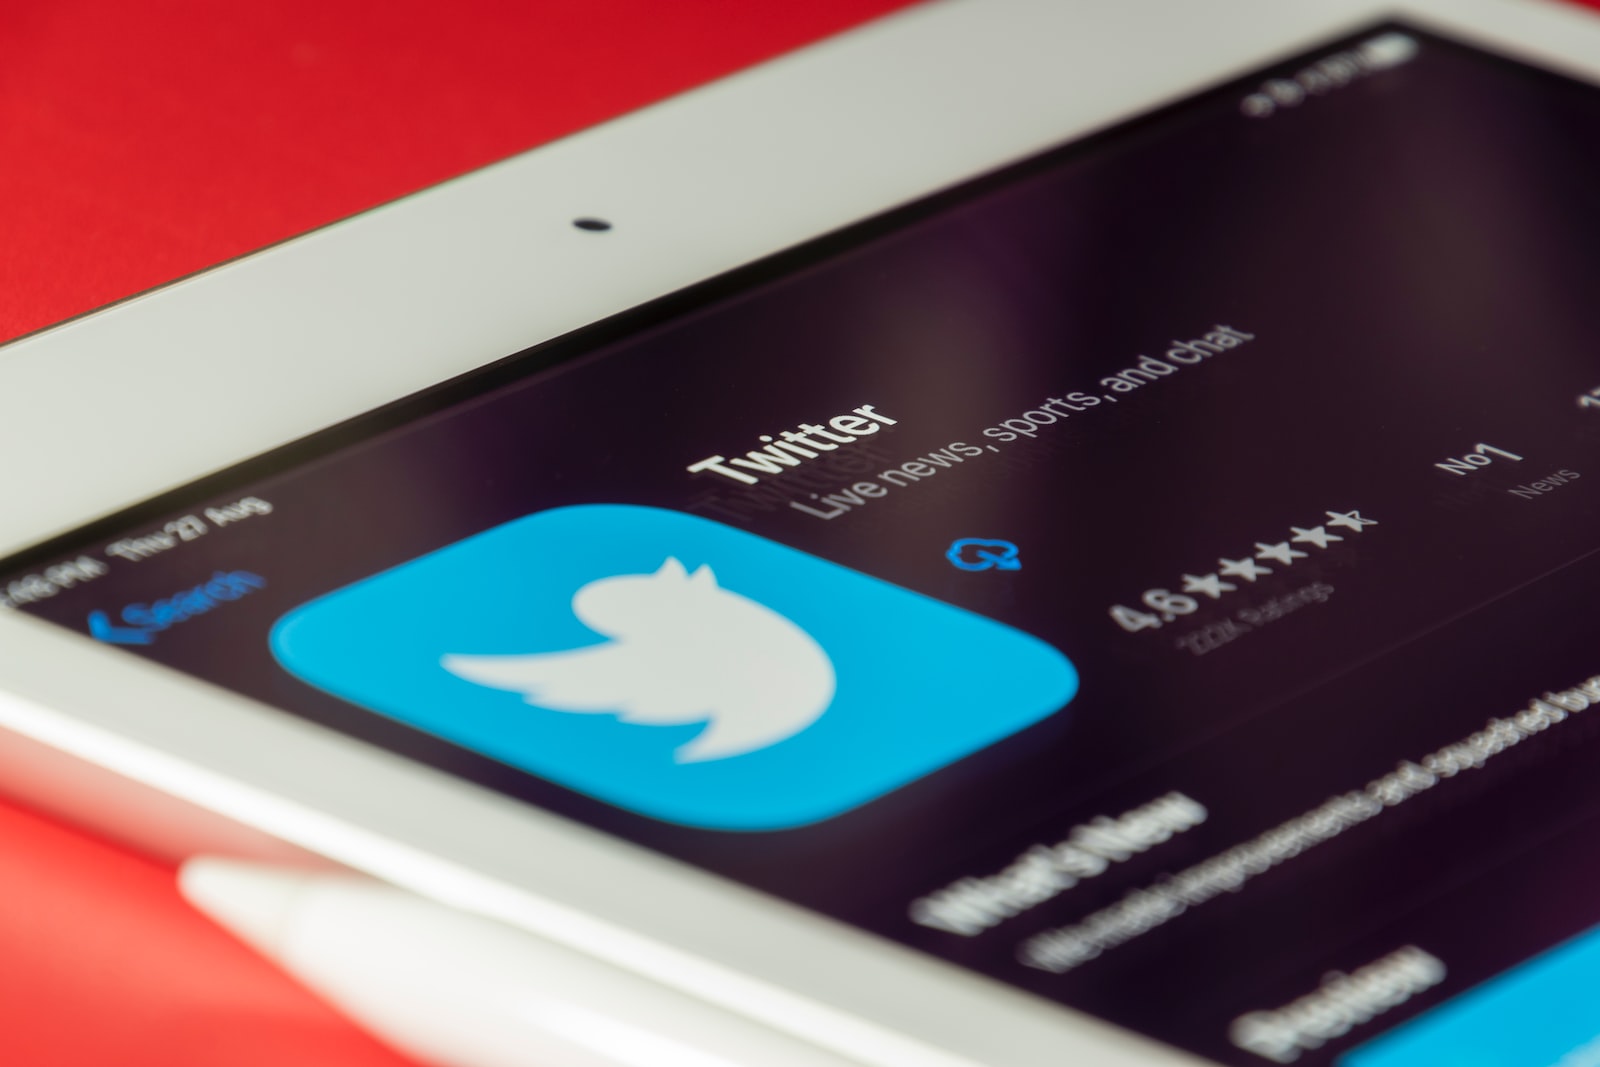 Twitter Confirms Fee Plans For Blue